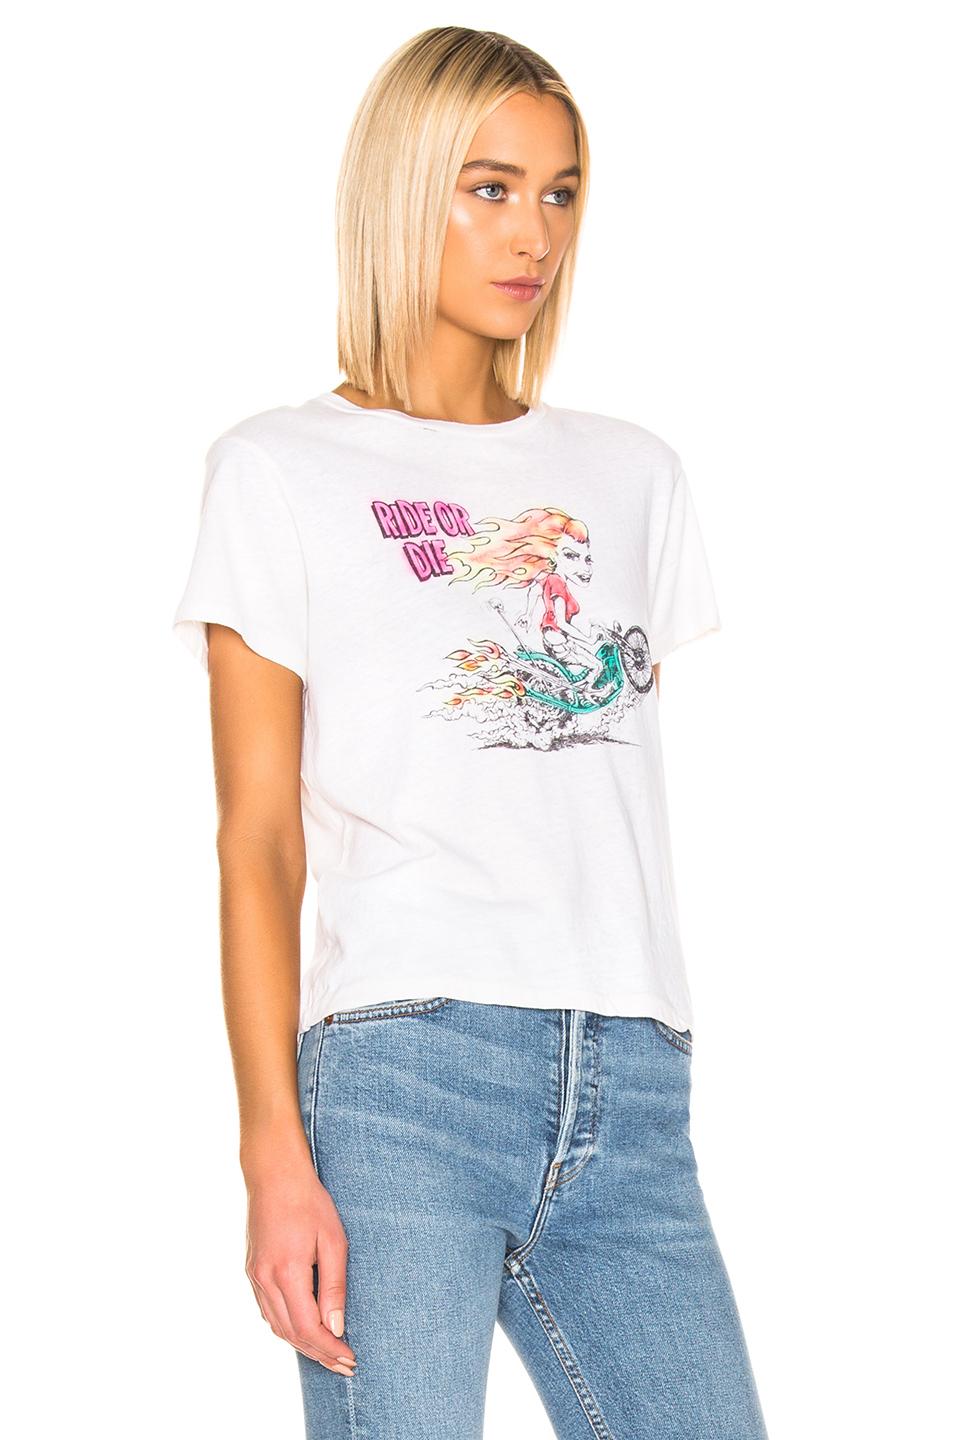 RE/DONE Cotton Classic Ride Or Die Tee in Vintage White (White) - Lyst